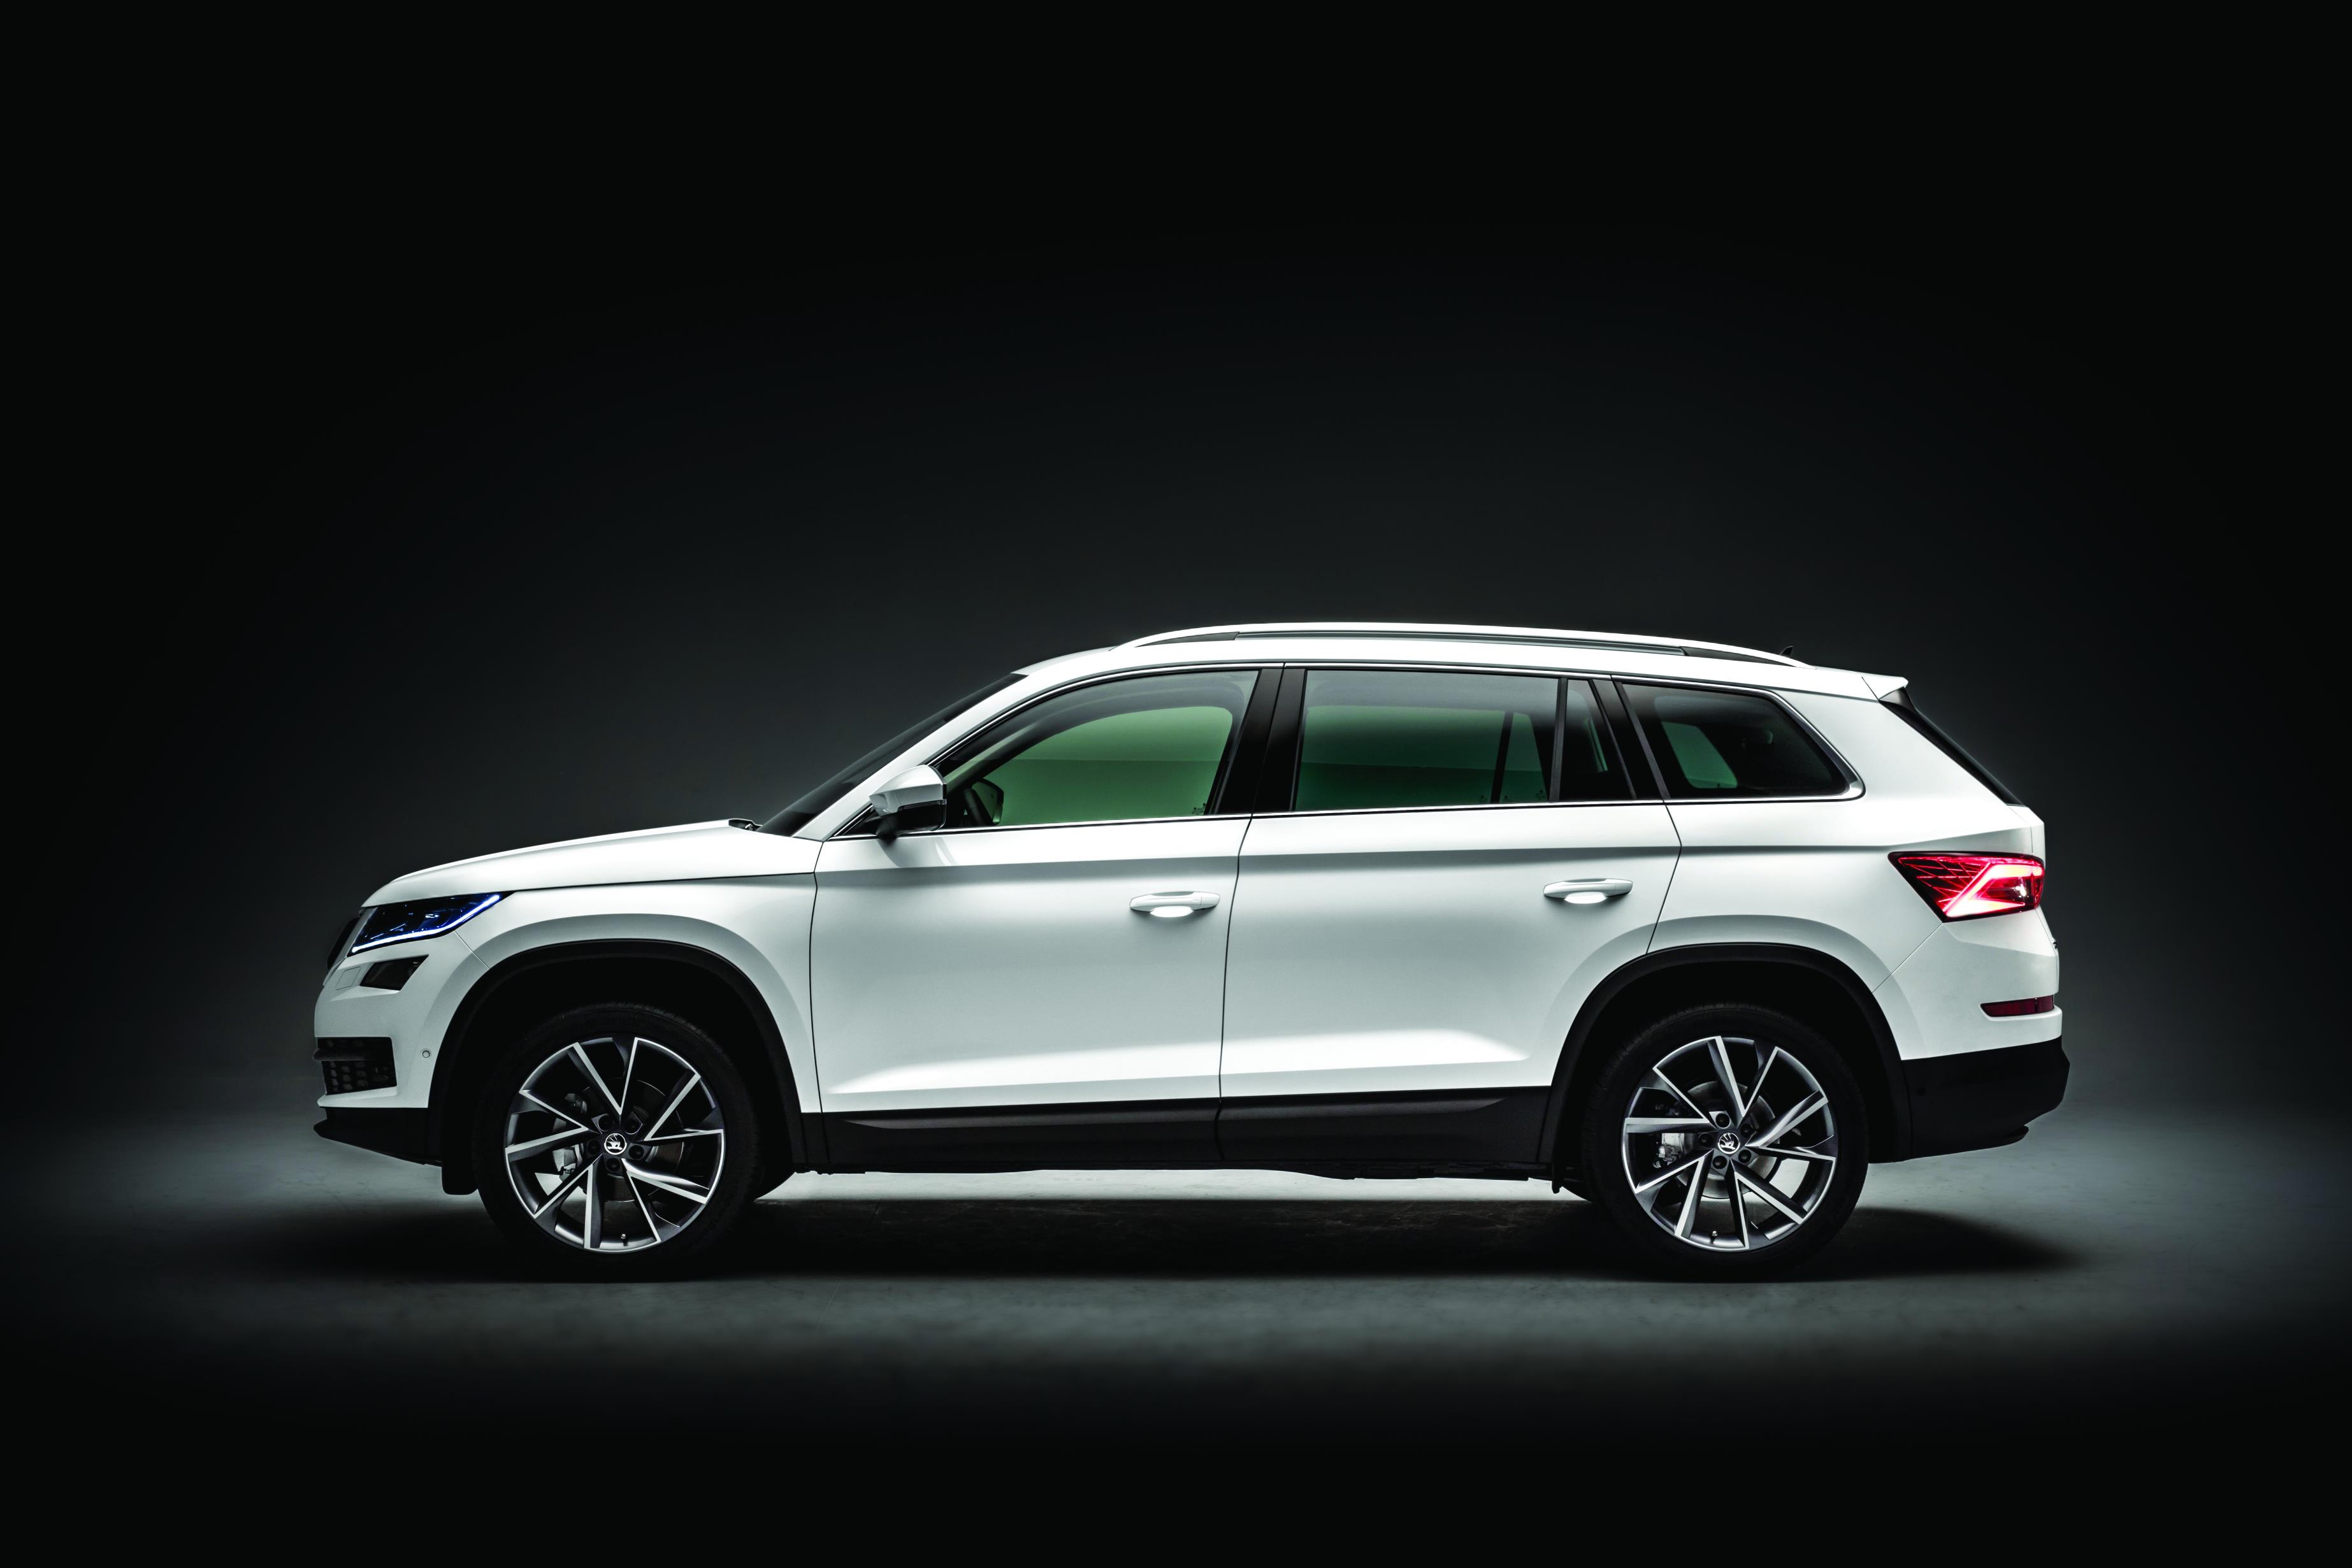 August: Skoda’s new seven seat SUV broke cover in August. What is it called?